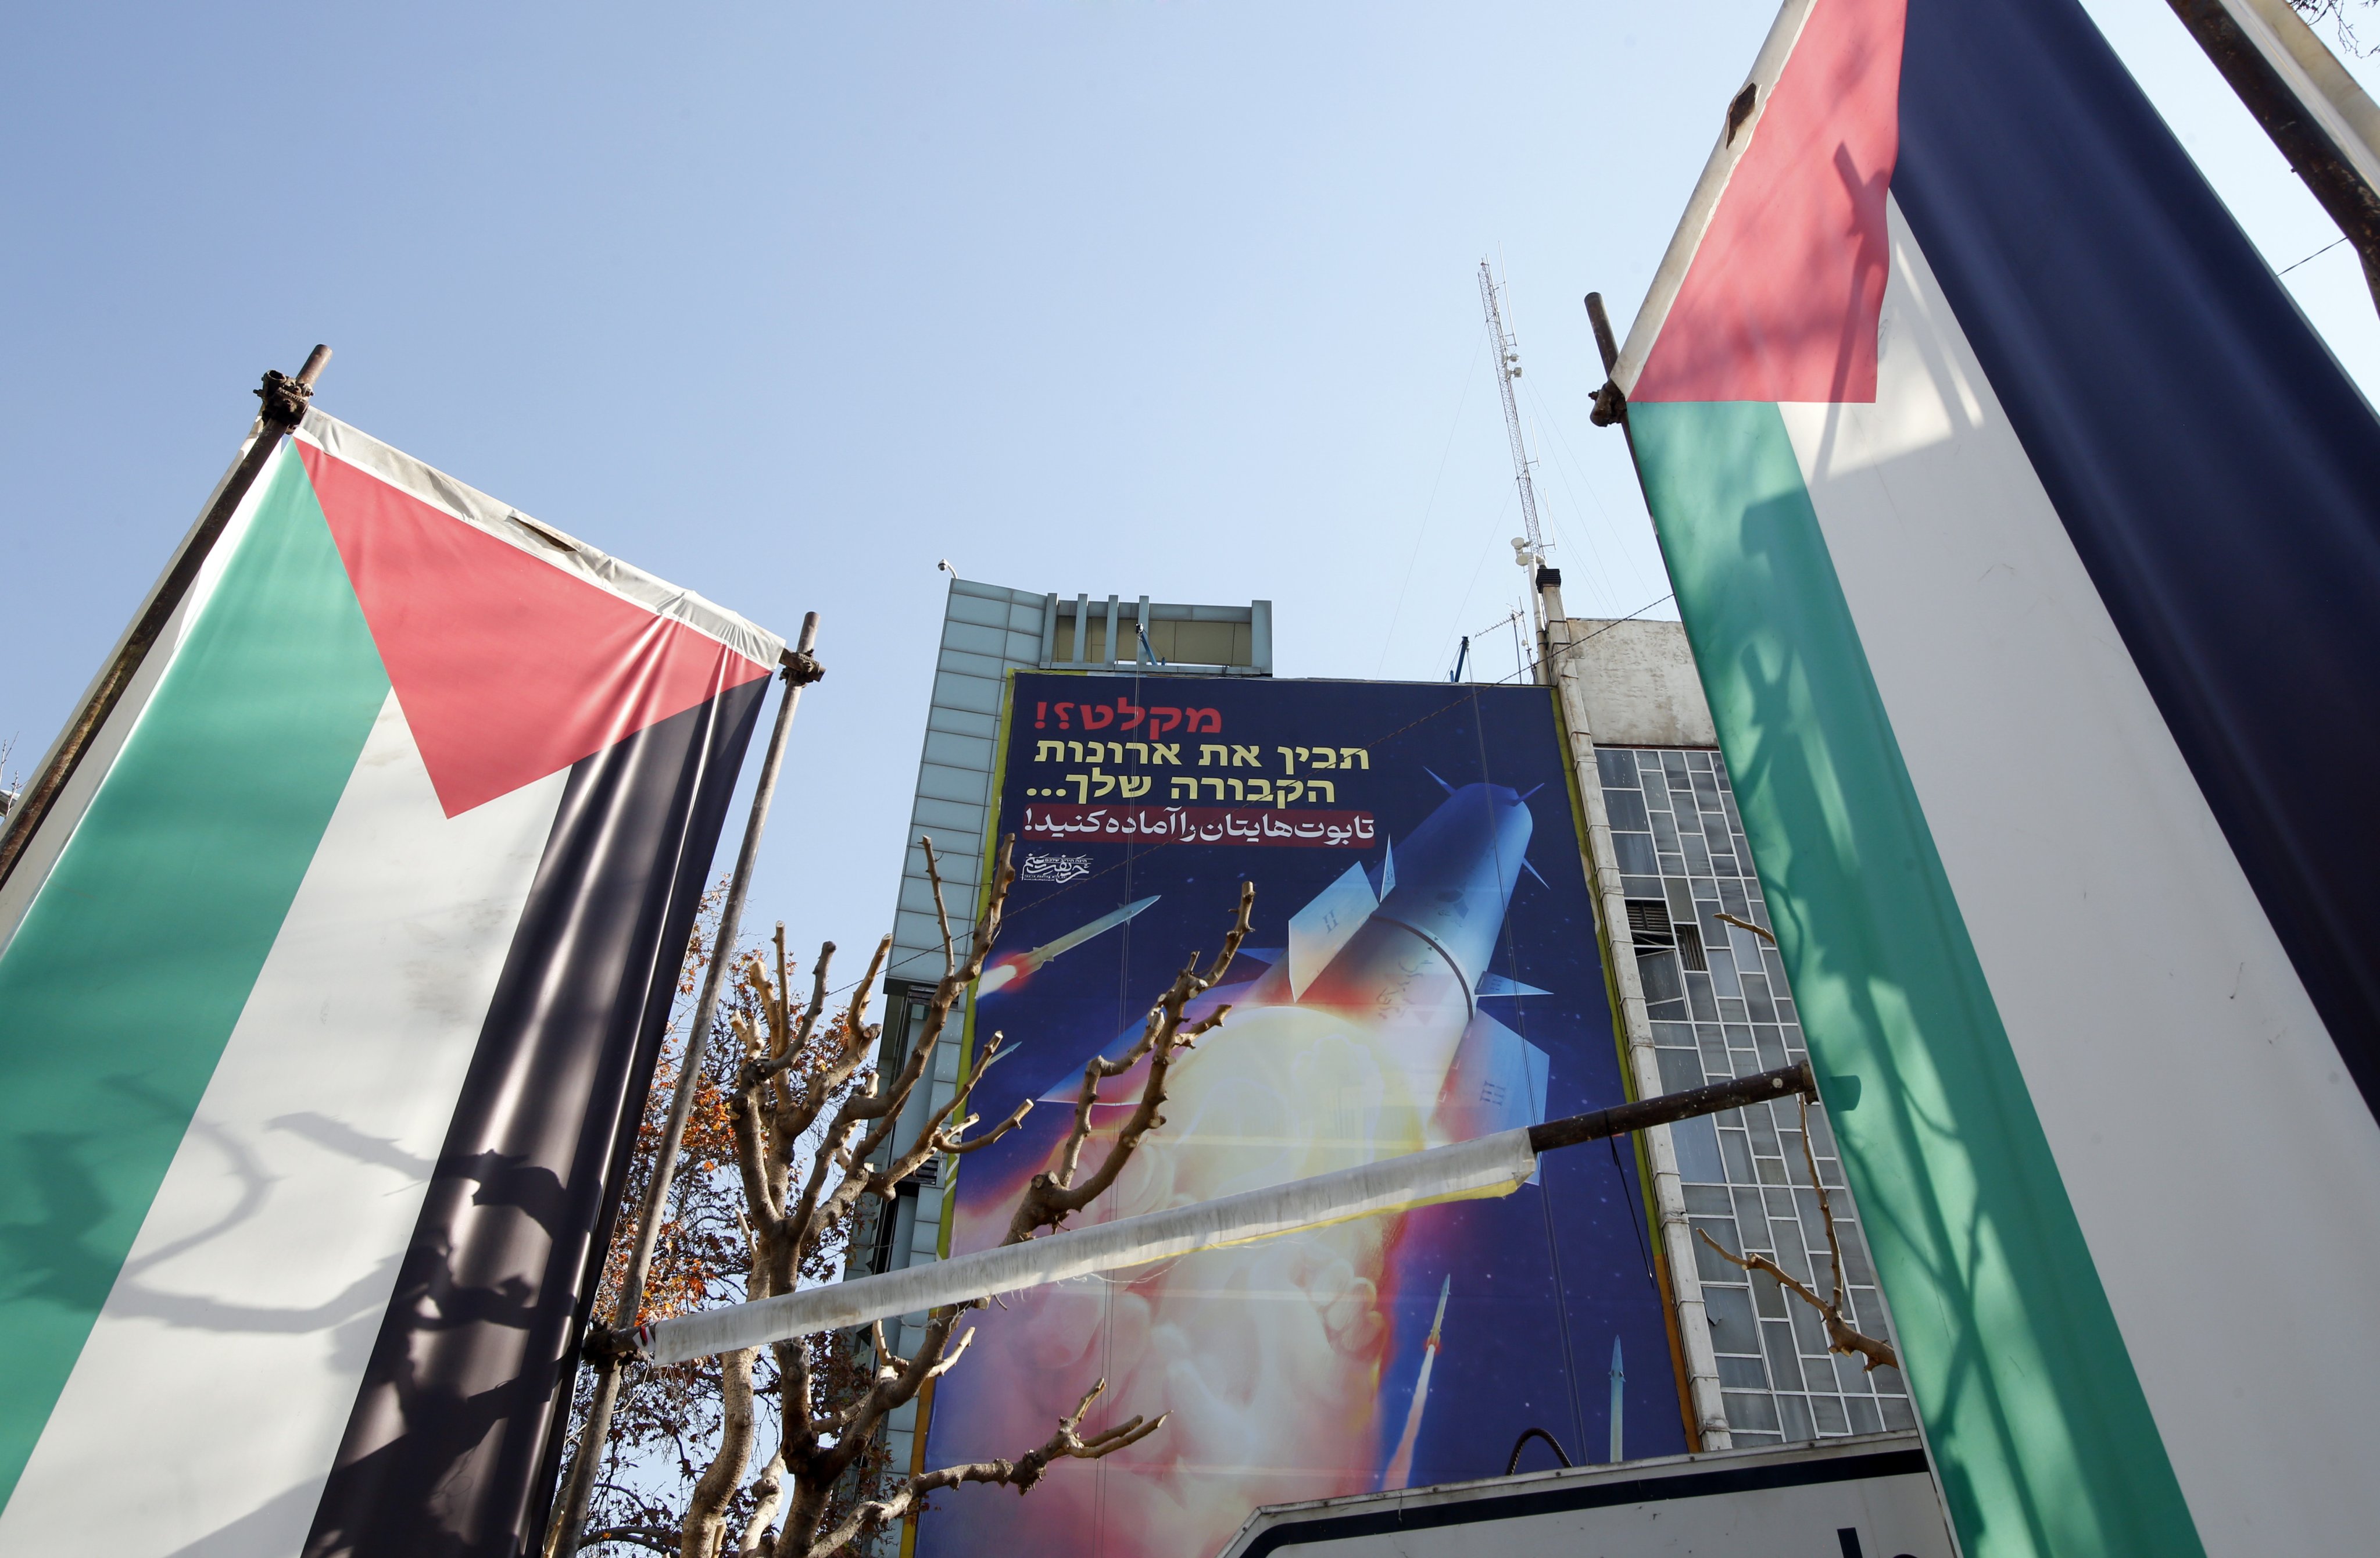 Palestinian flags and a billboard depicting Iranian missiles are seen in Tehran, Iran on Tuesday with a message in Persian and Hebrew reading: “Prepare your coffins”. Photo: EPA-EFE